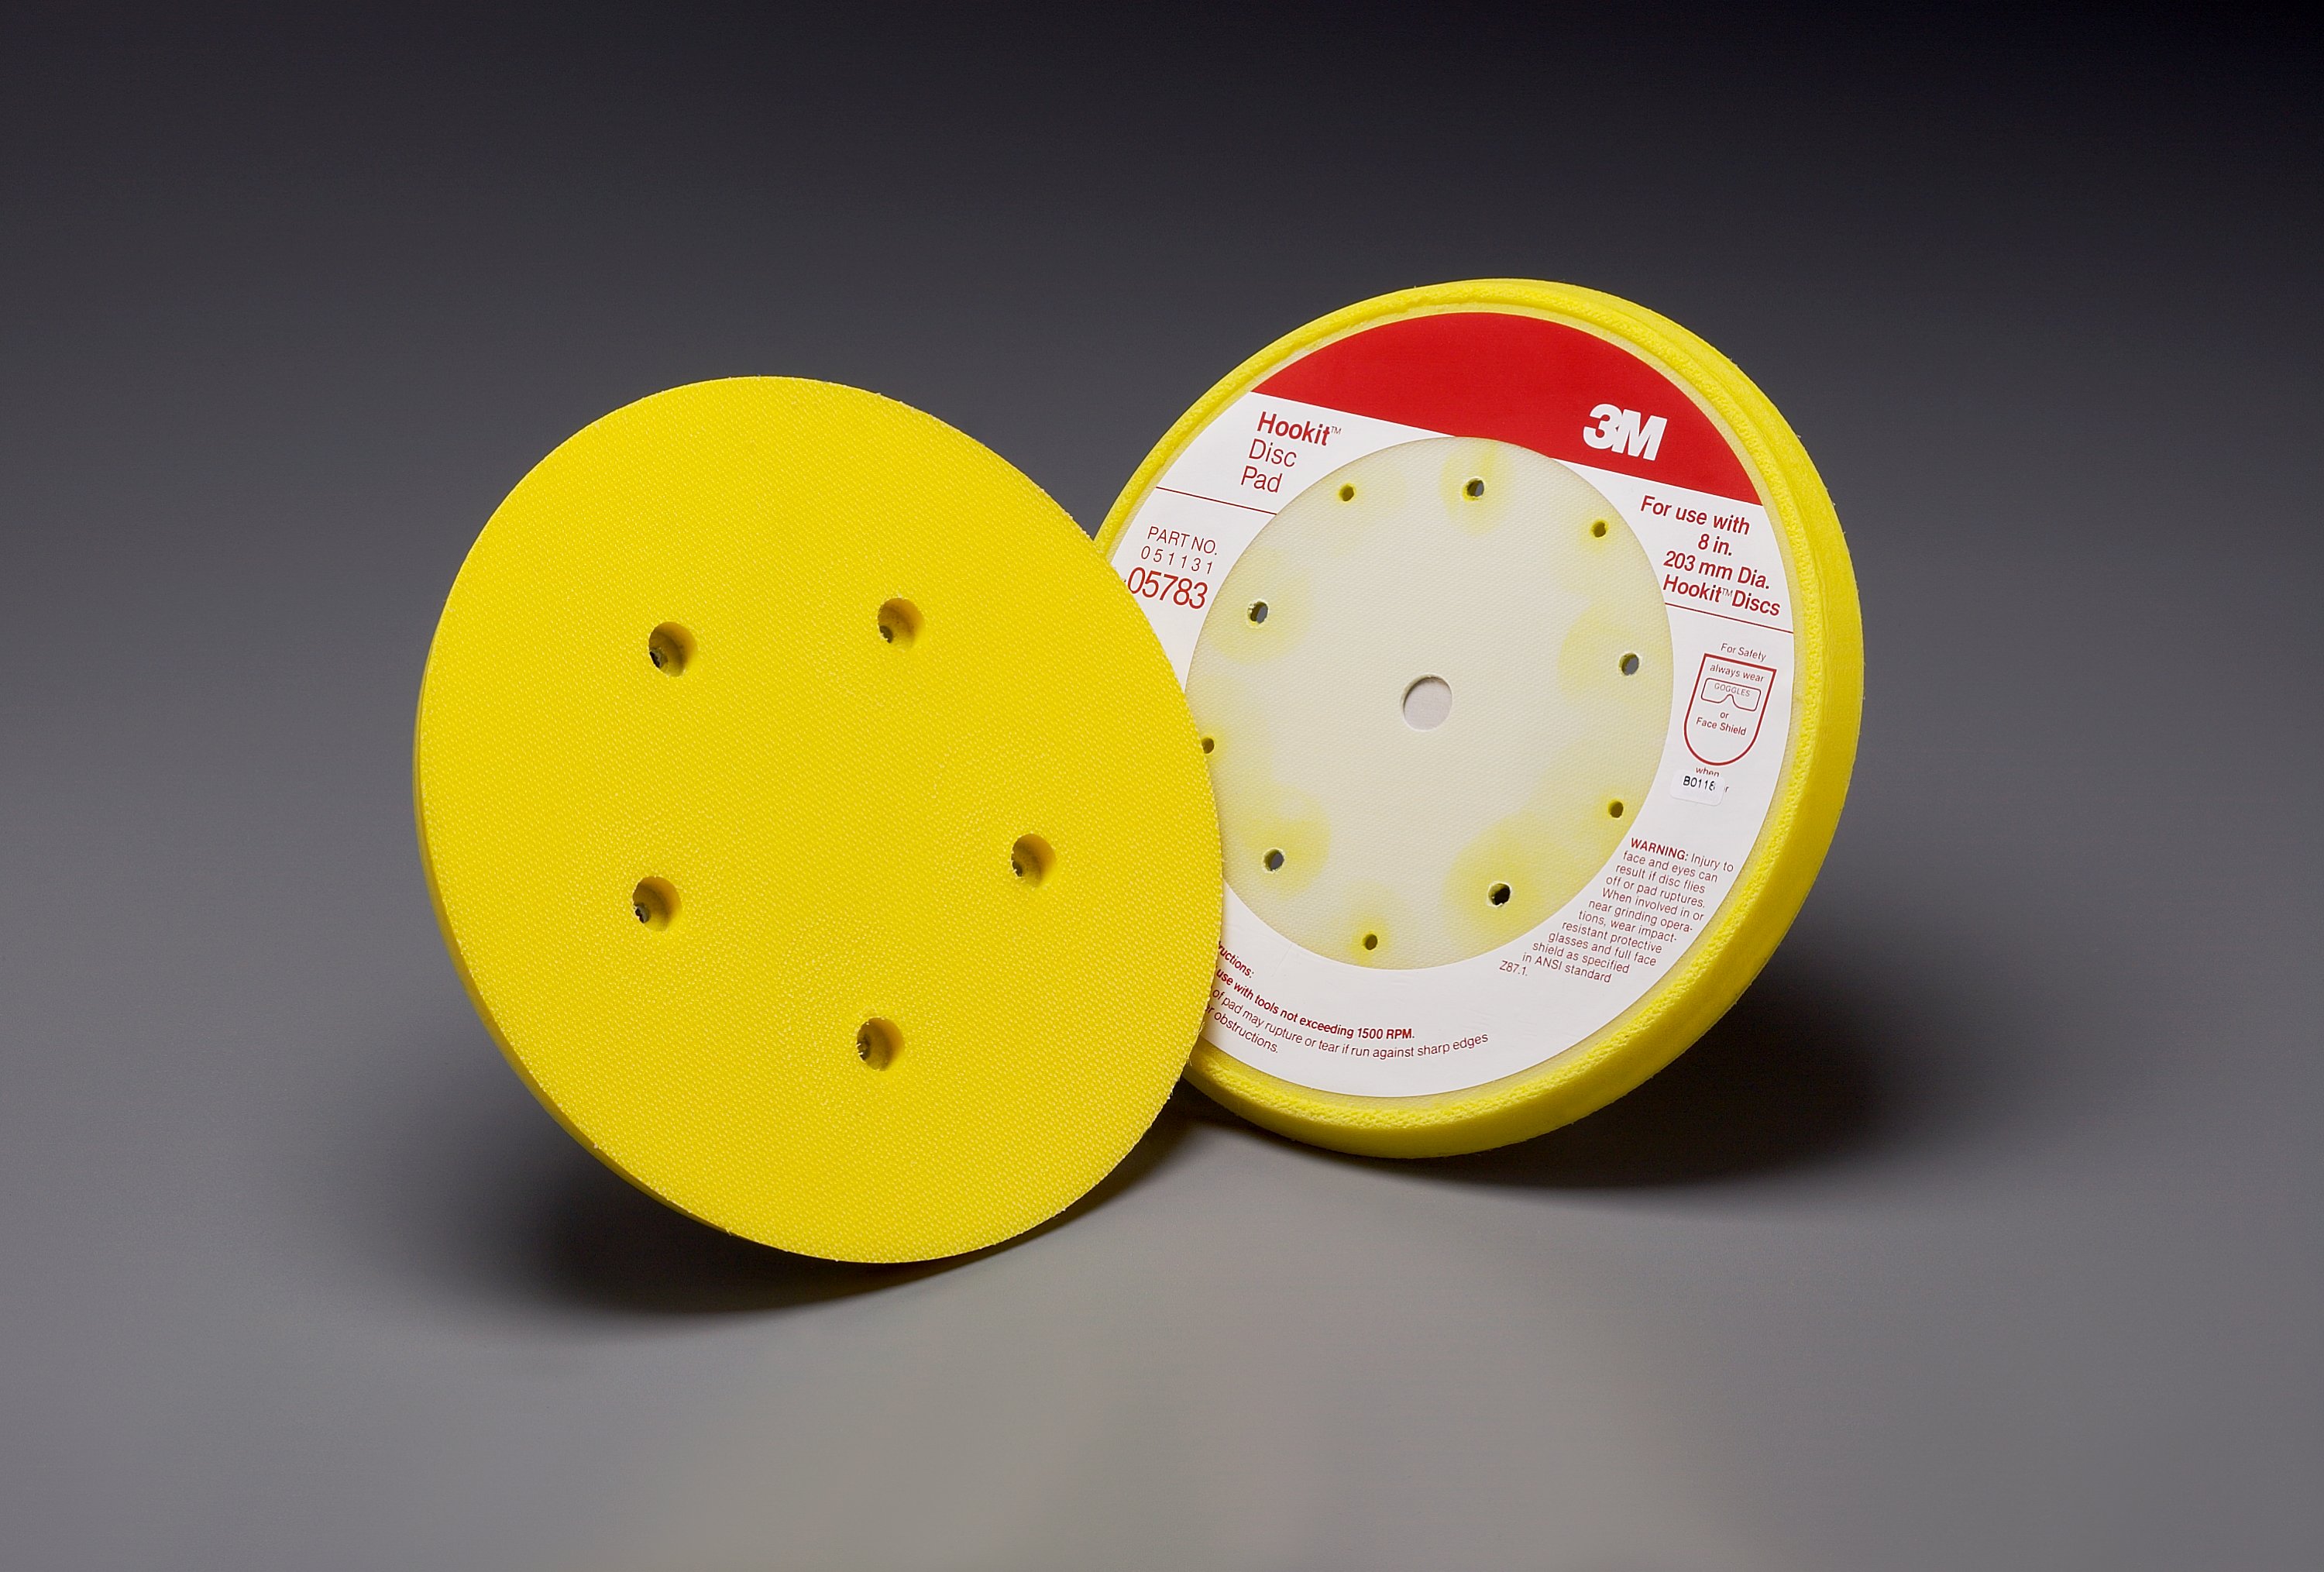 Its firm density foam body provides excellent support for 3M™ Hookit™ abrasive discs (sold separately) and its 15° tapered edge adds control for accurate, consistent flat sanding near the edges of the substrate.